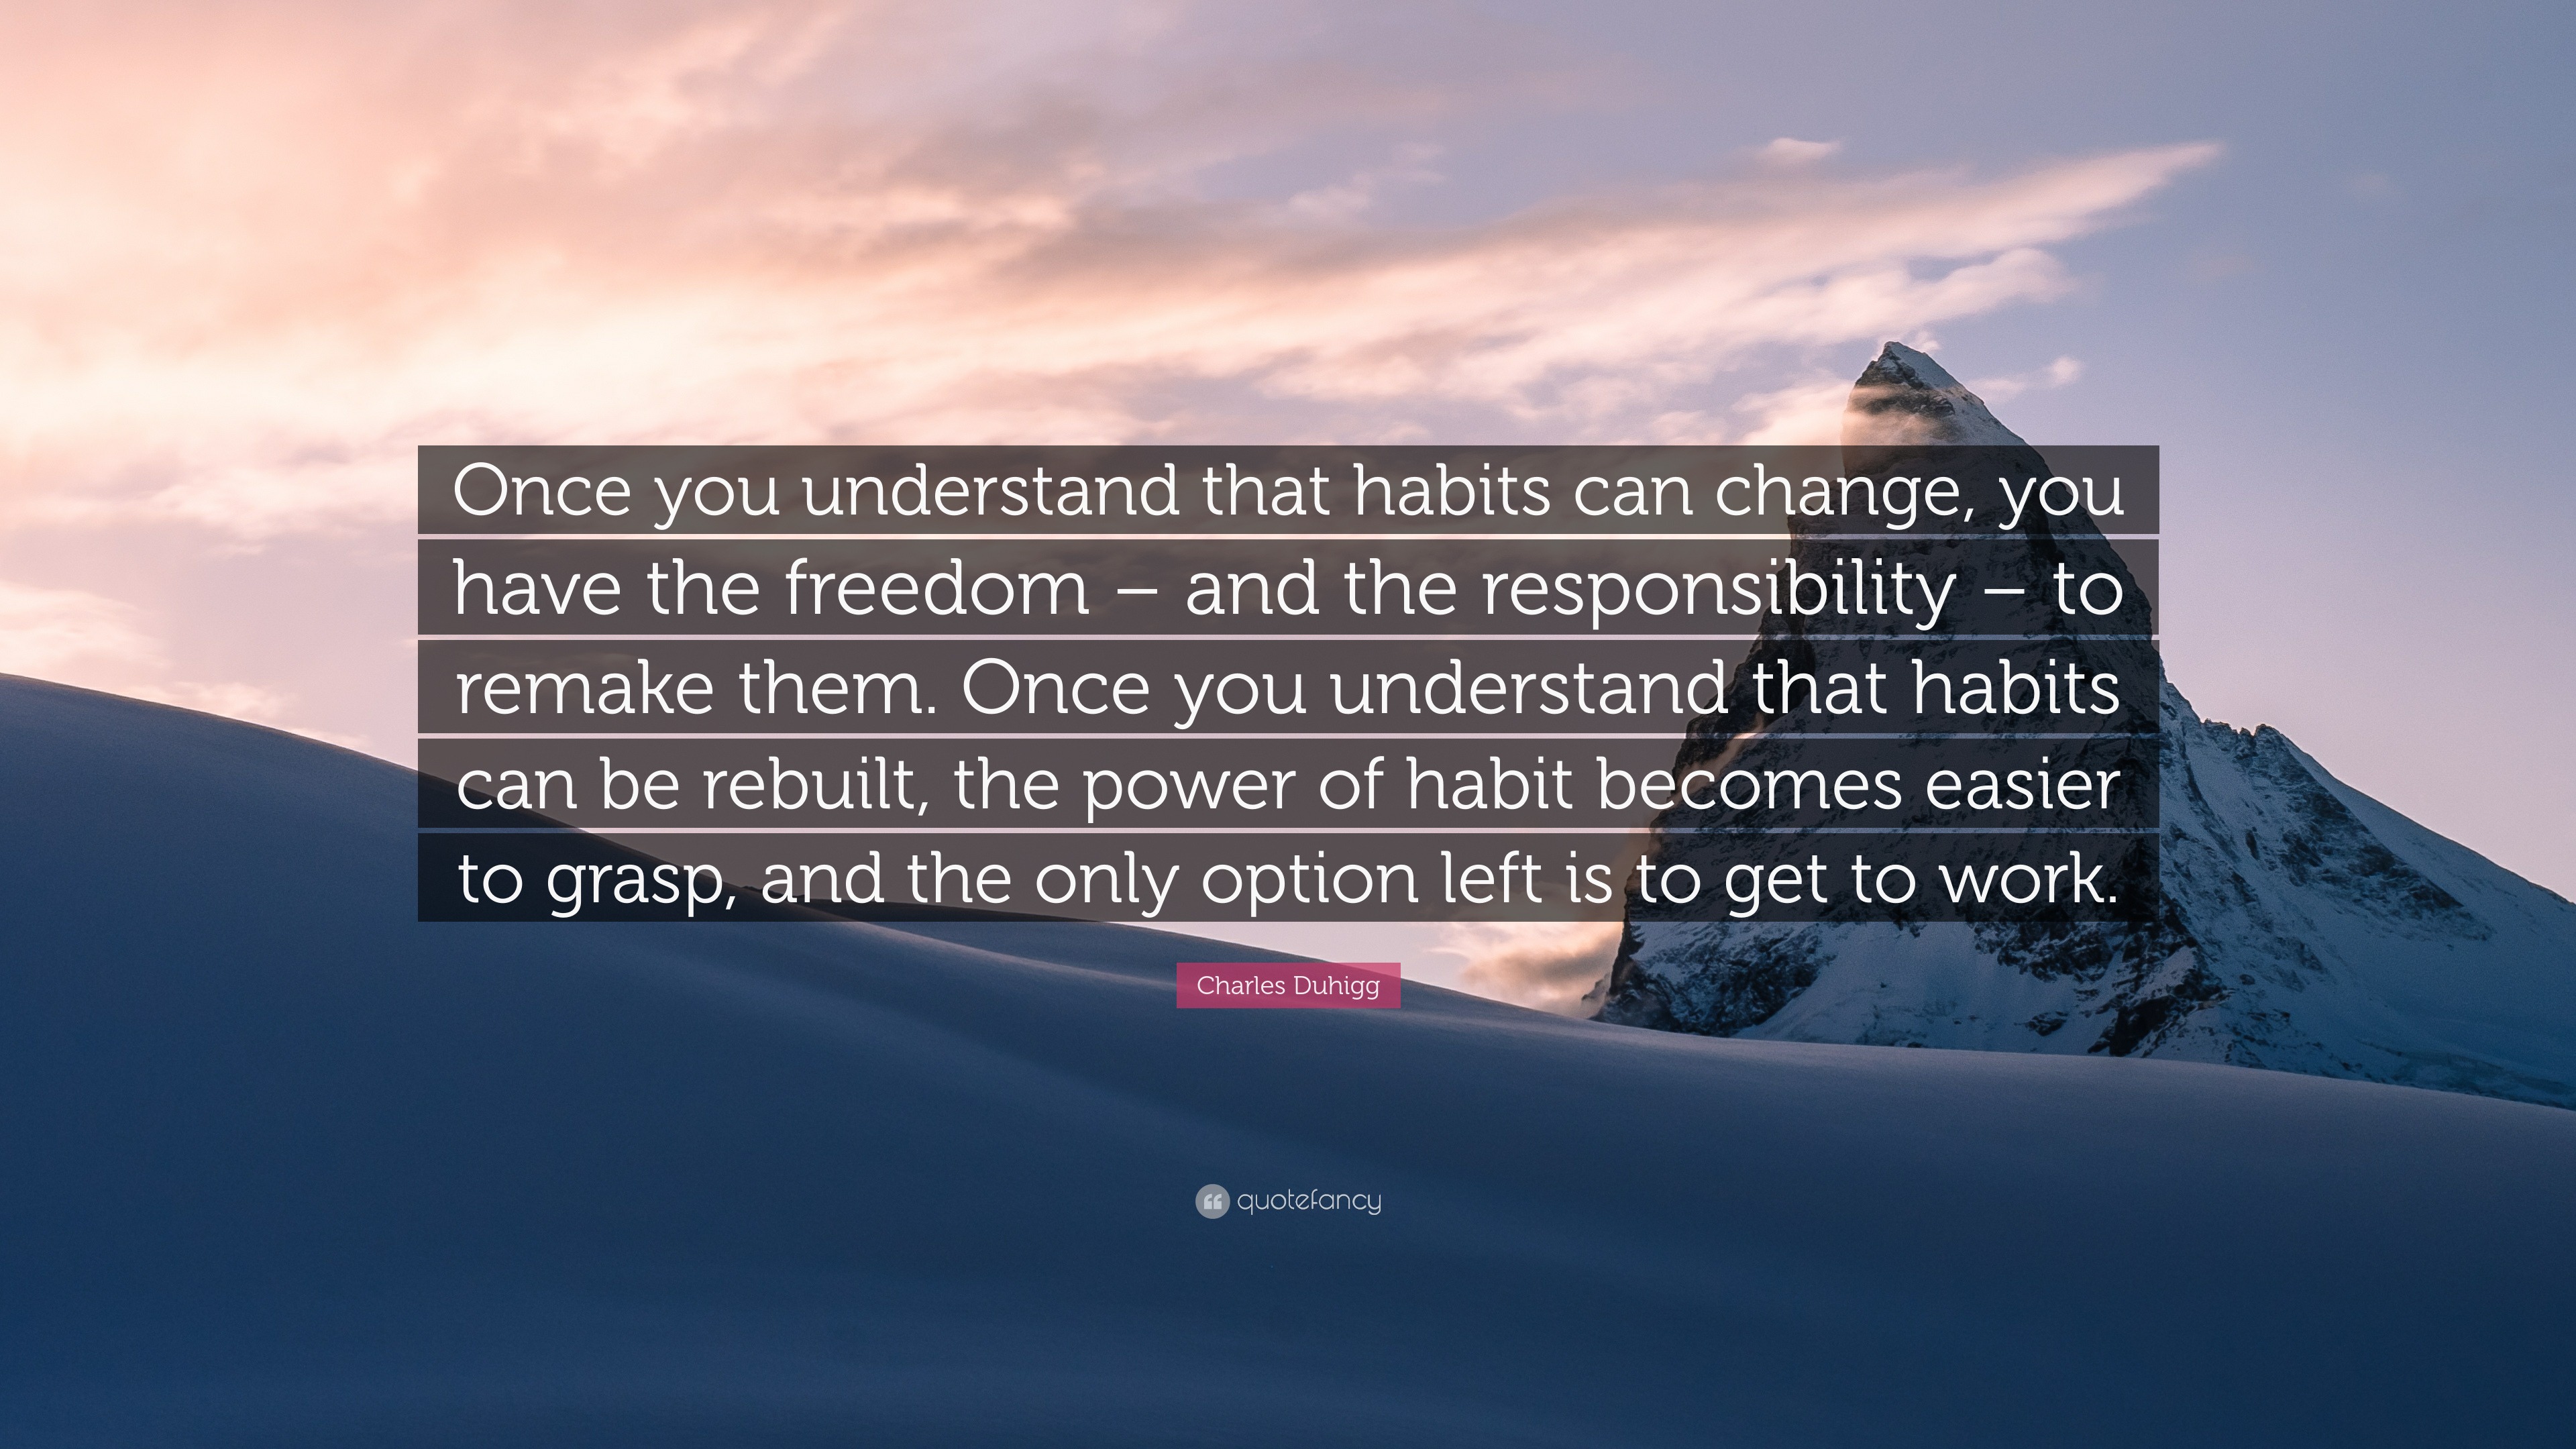 Charles Duhigg Quote: “Once you understand that habits can change, you